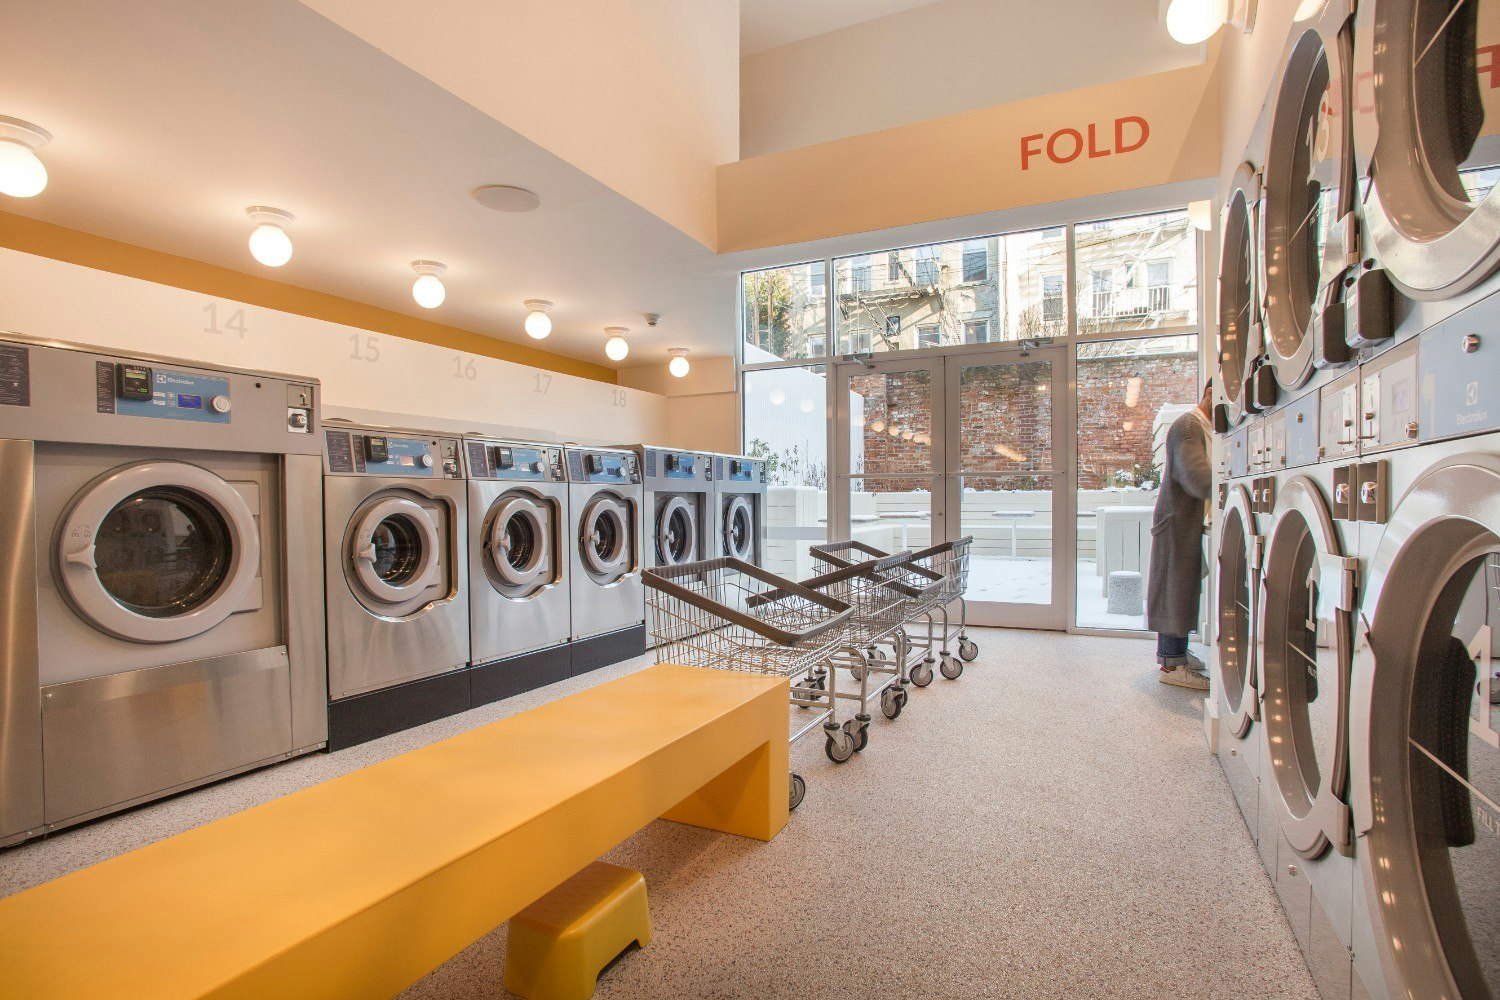 The interior of the Celsious laundromat in Brooklyn